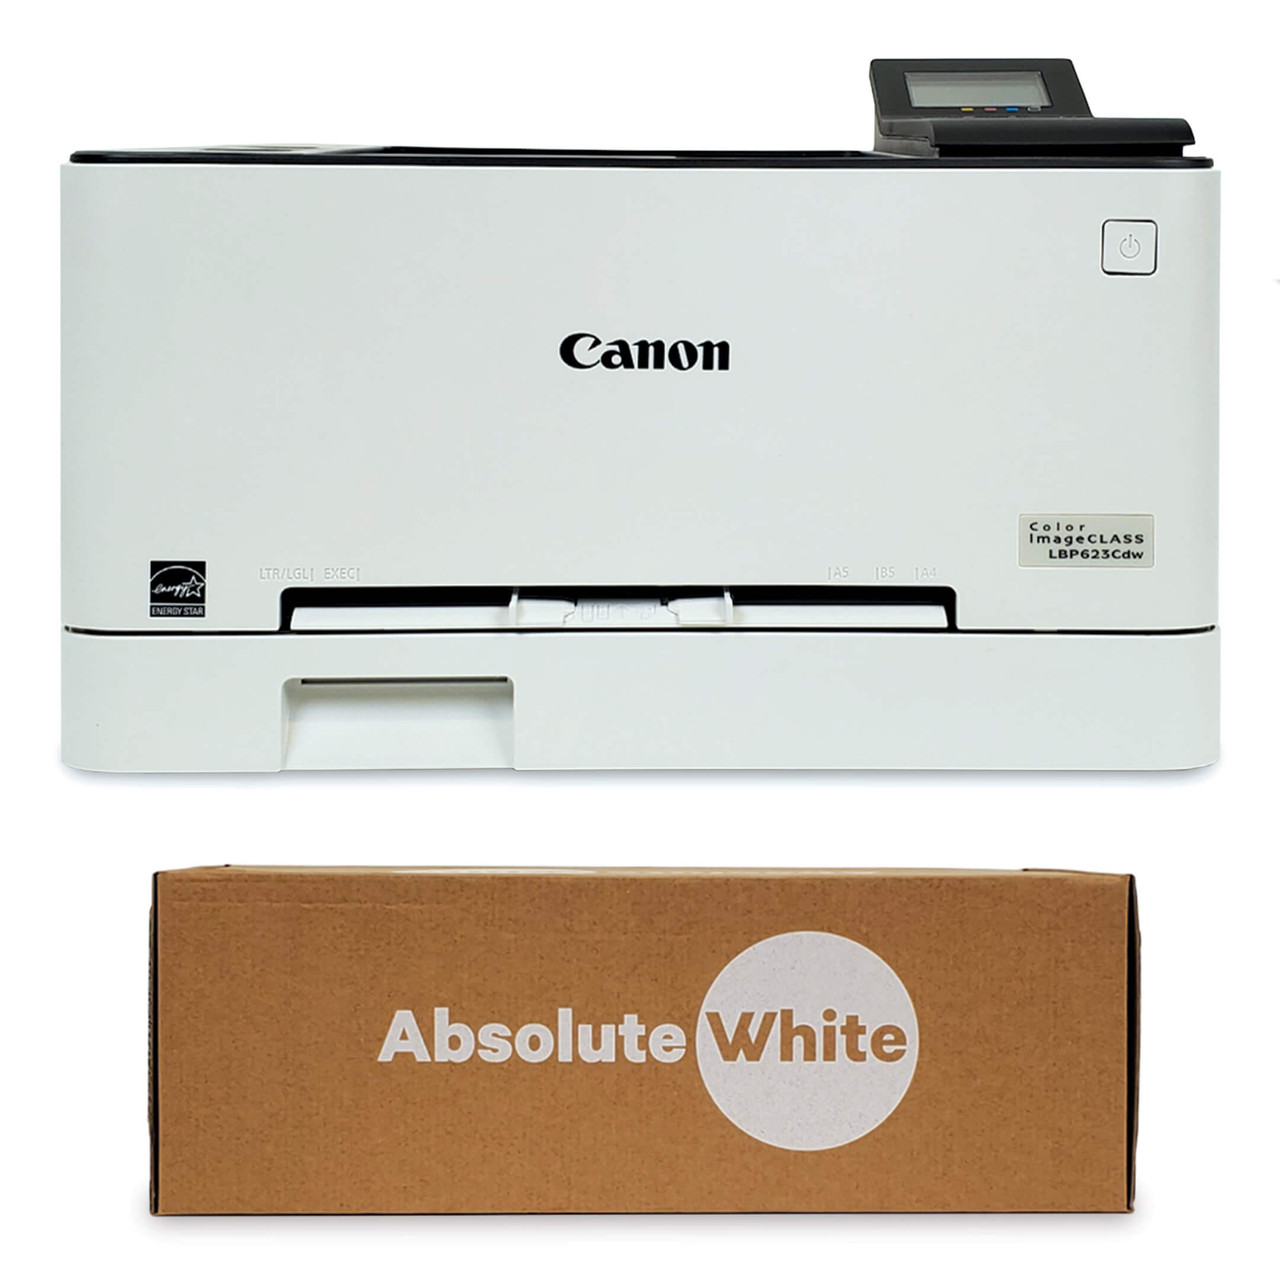 Canon LBP623Cdw 22P Laser Printer with Absolute White Toner Cartridge